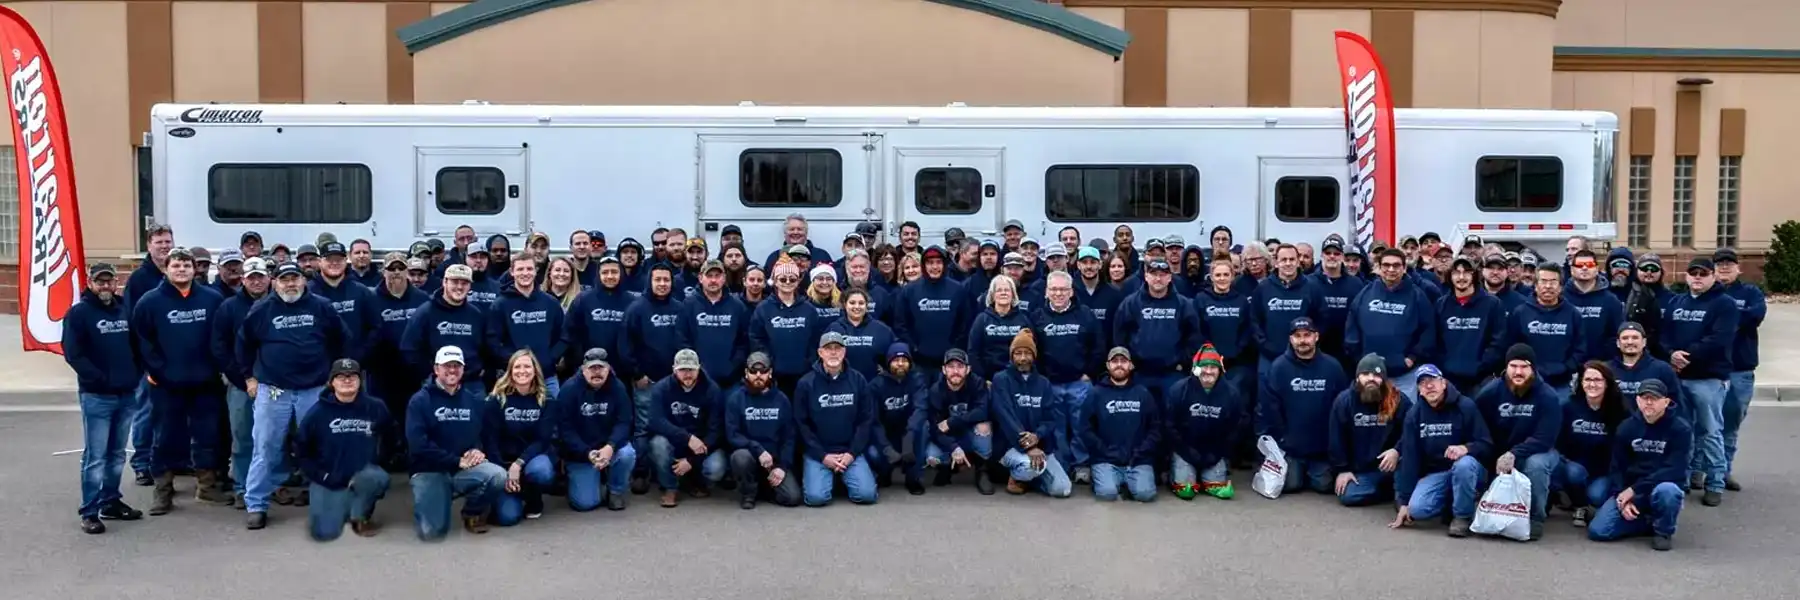 The Cimorron employees pose for a wide angle shot in front of their building